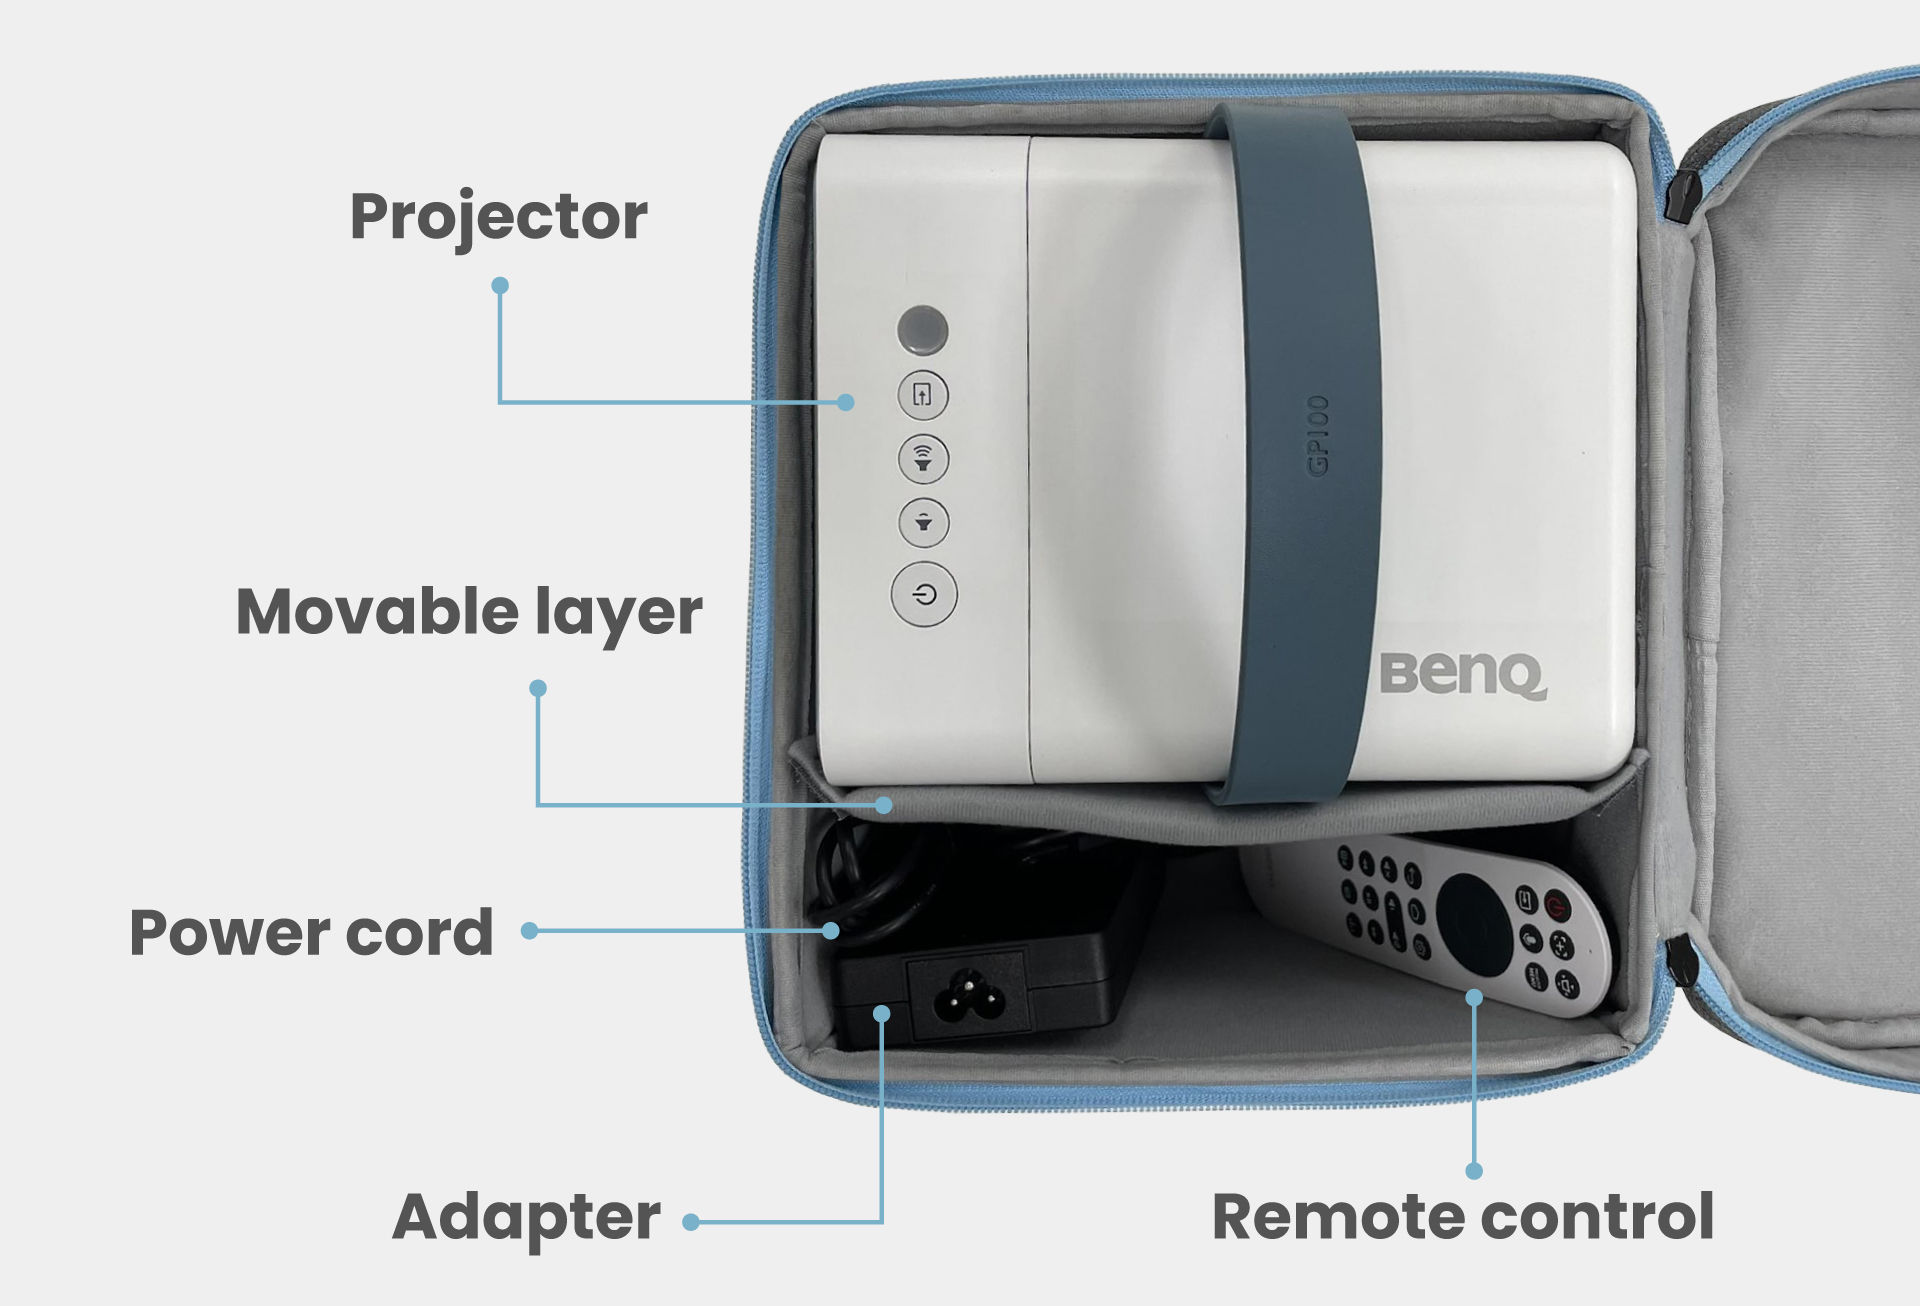 BenQ GP100A Carry Case make your accessories like power bank and remote control stay organized